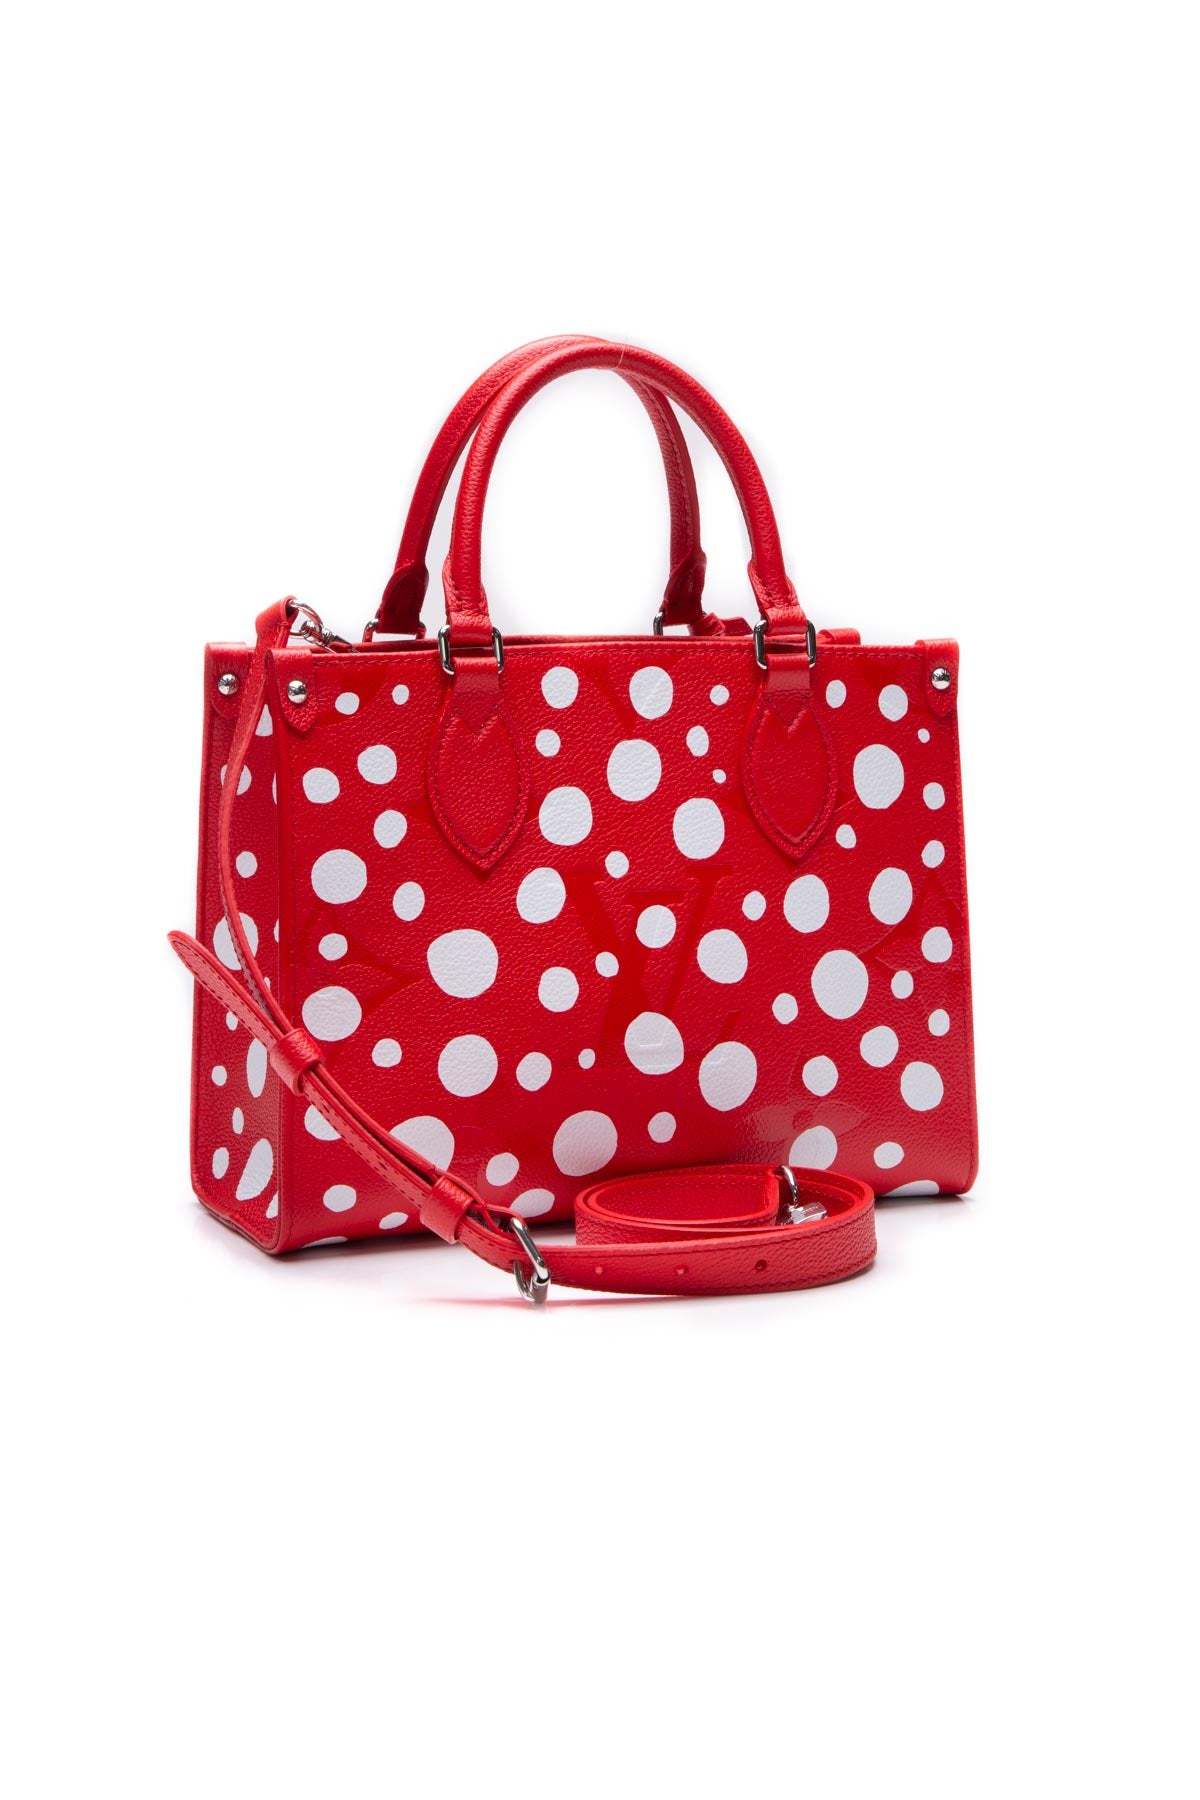 Red And White Louis Vuitton Purse